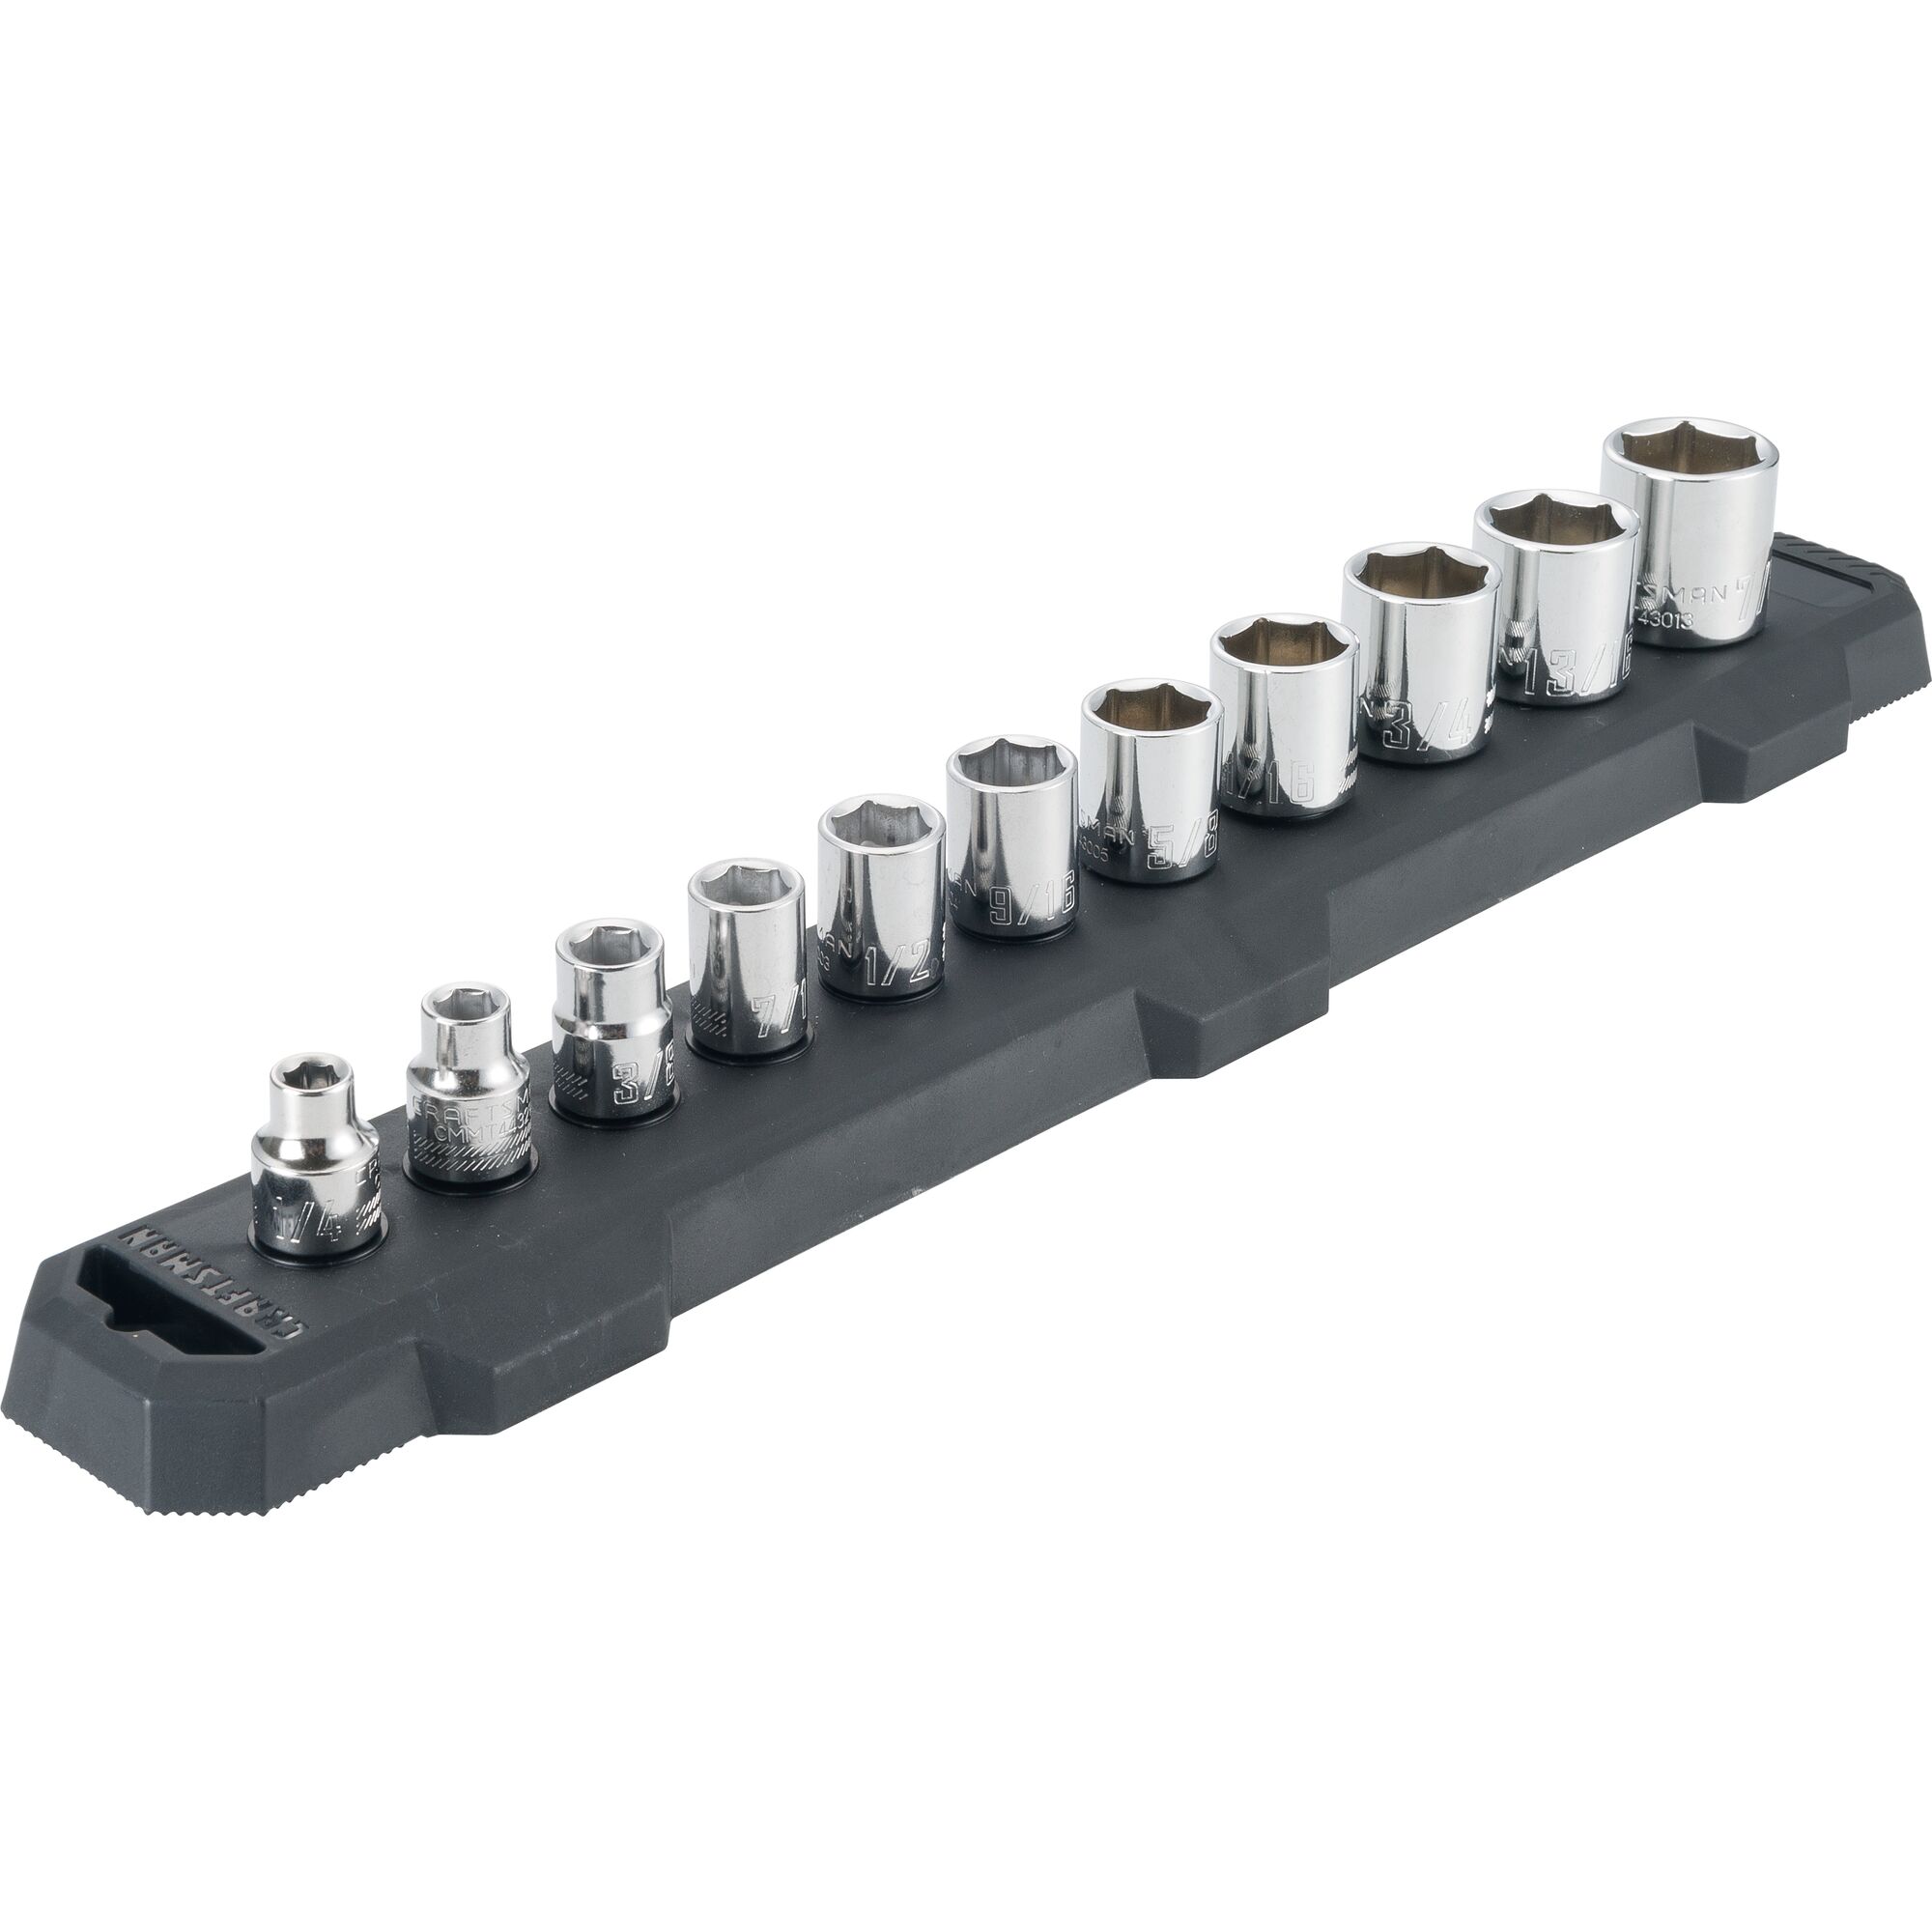 View of CRAFTSMAN Sockets: 6-Point on white background